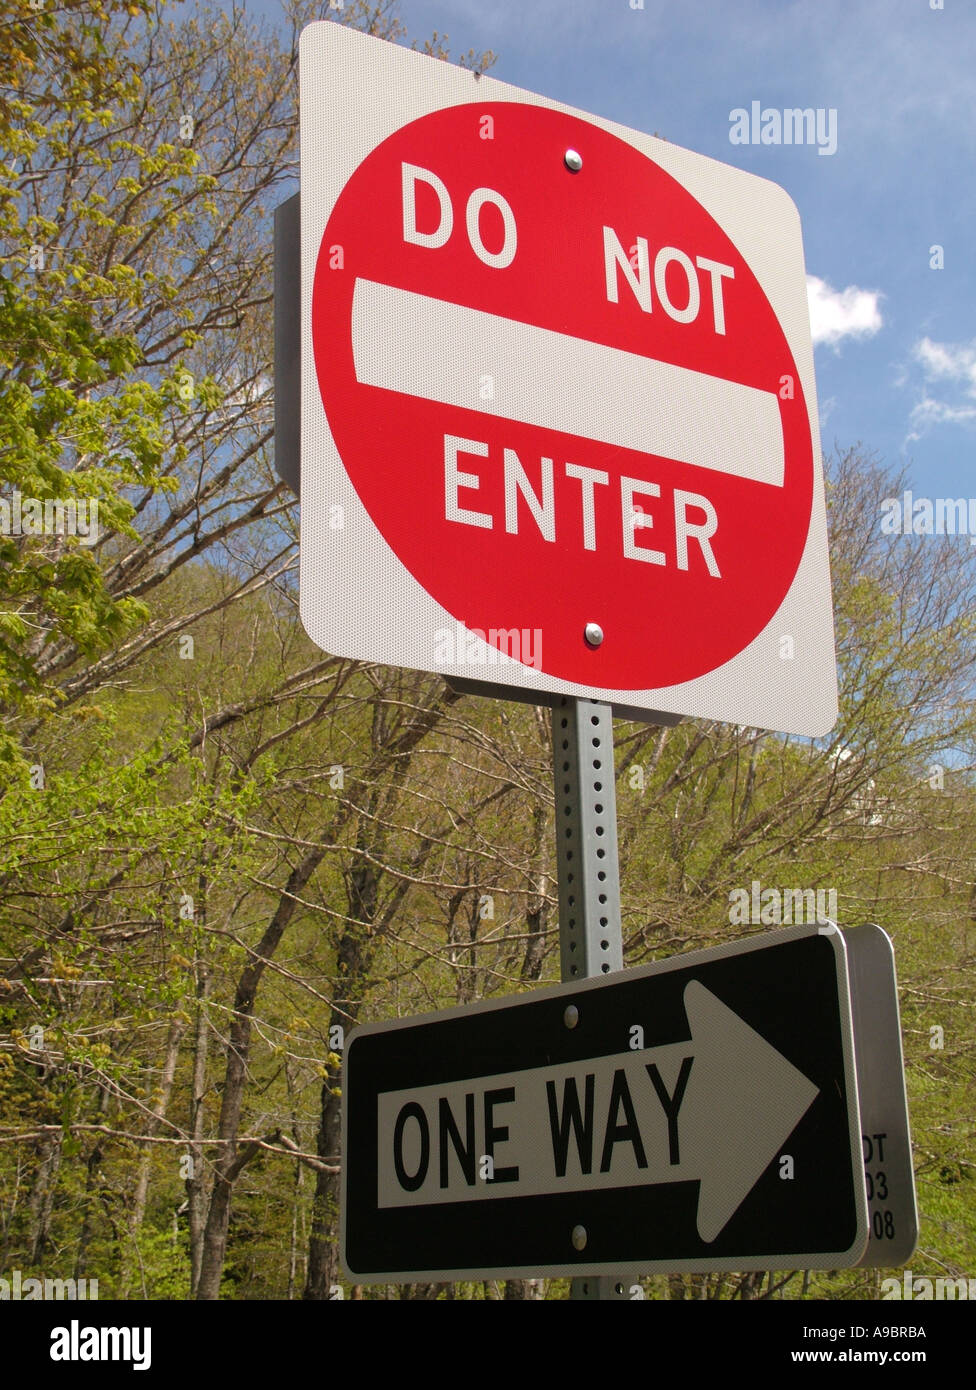 Ajd Road Signs Do Not Enter One Way Stock Photo Alamy